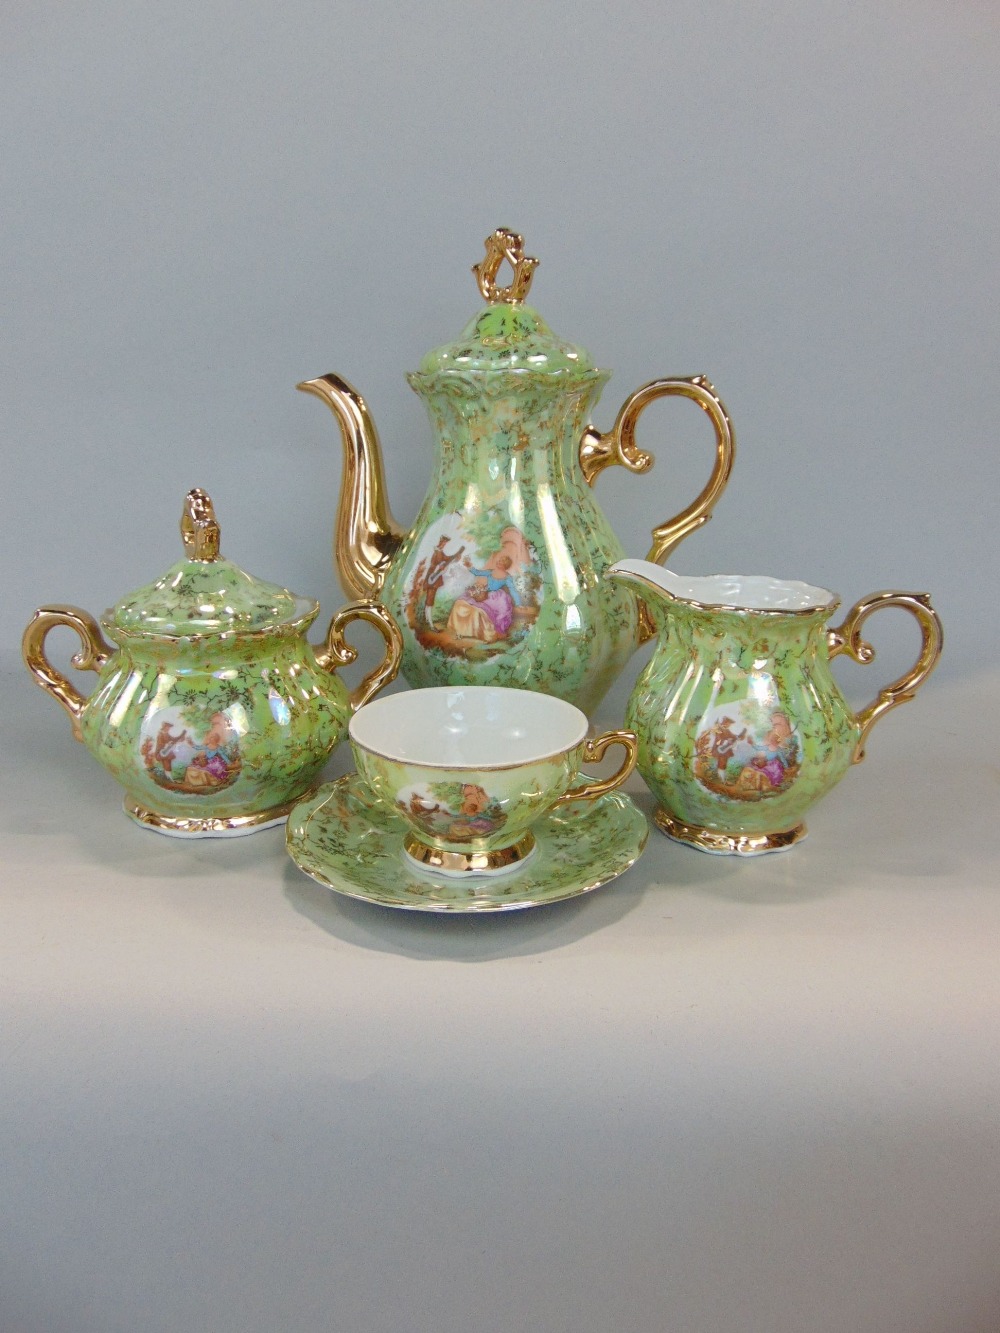 A continental porcelain coffee service in a green and gilt colourway, together with a further - Image 2 of 3